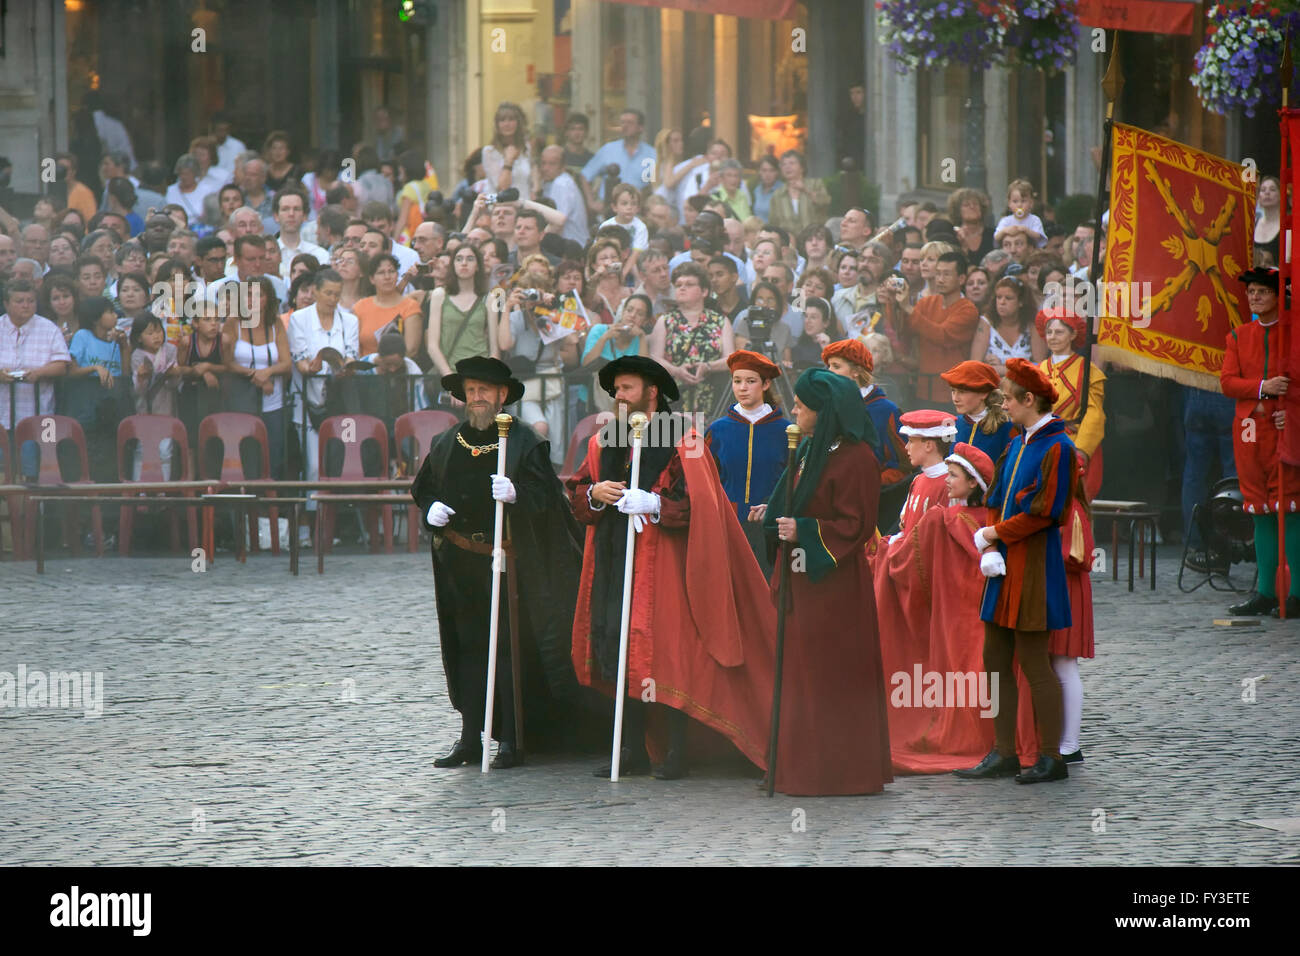 Procession during the Ommegang, Brussels, Belgium Stock Photo